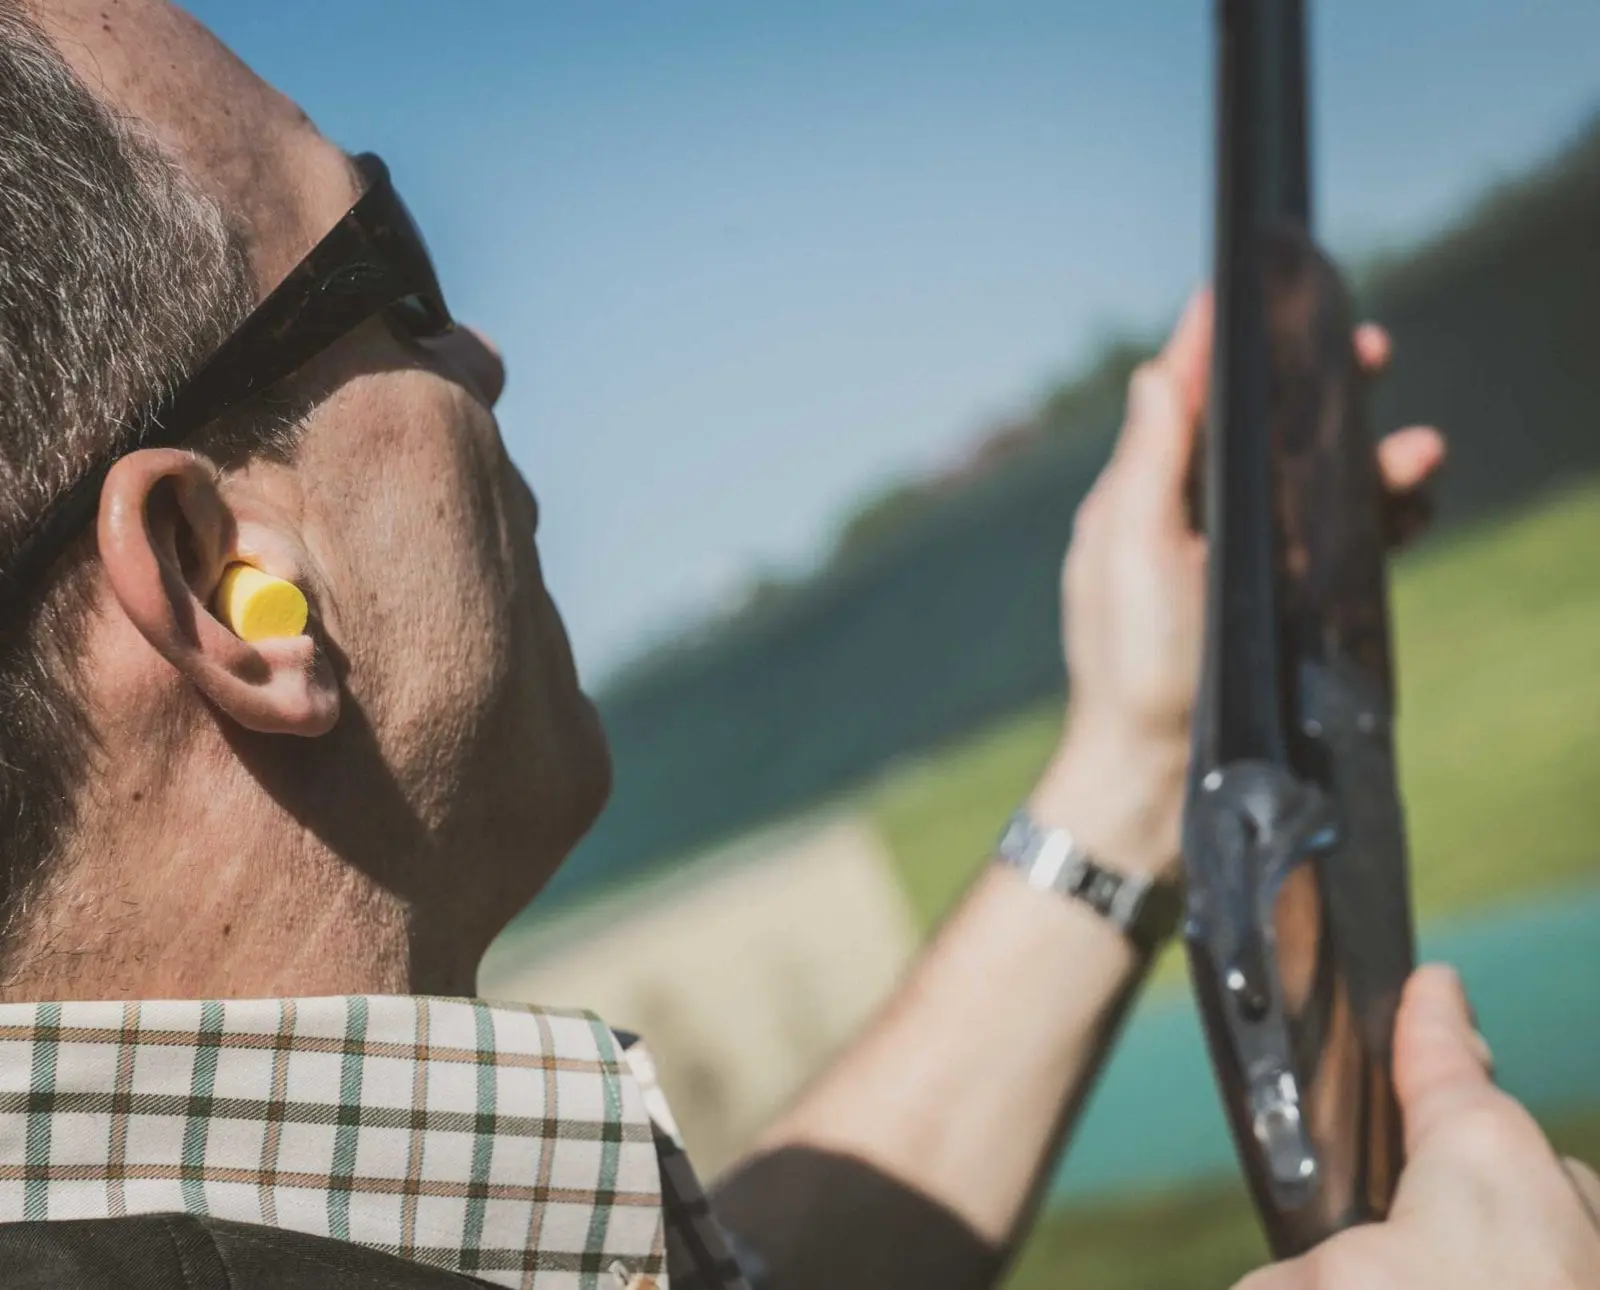 A skeet shooter stands at the ready for a clay pigeon.